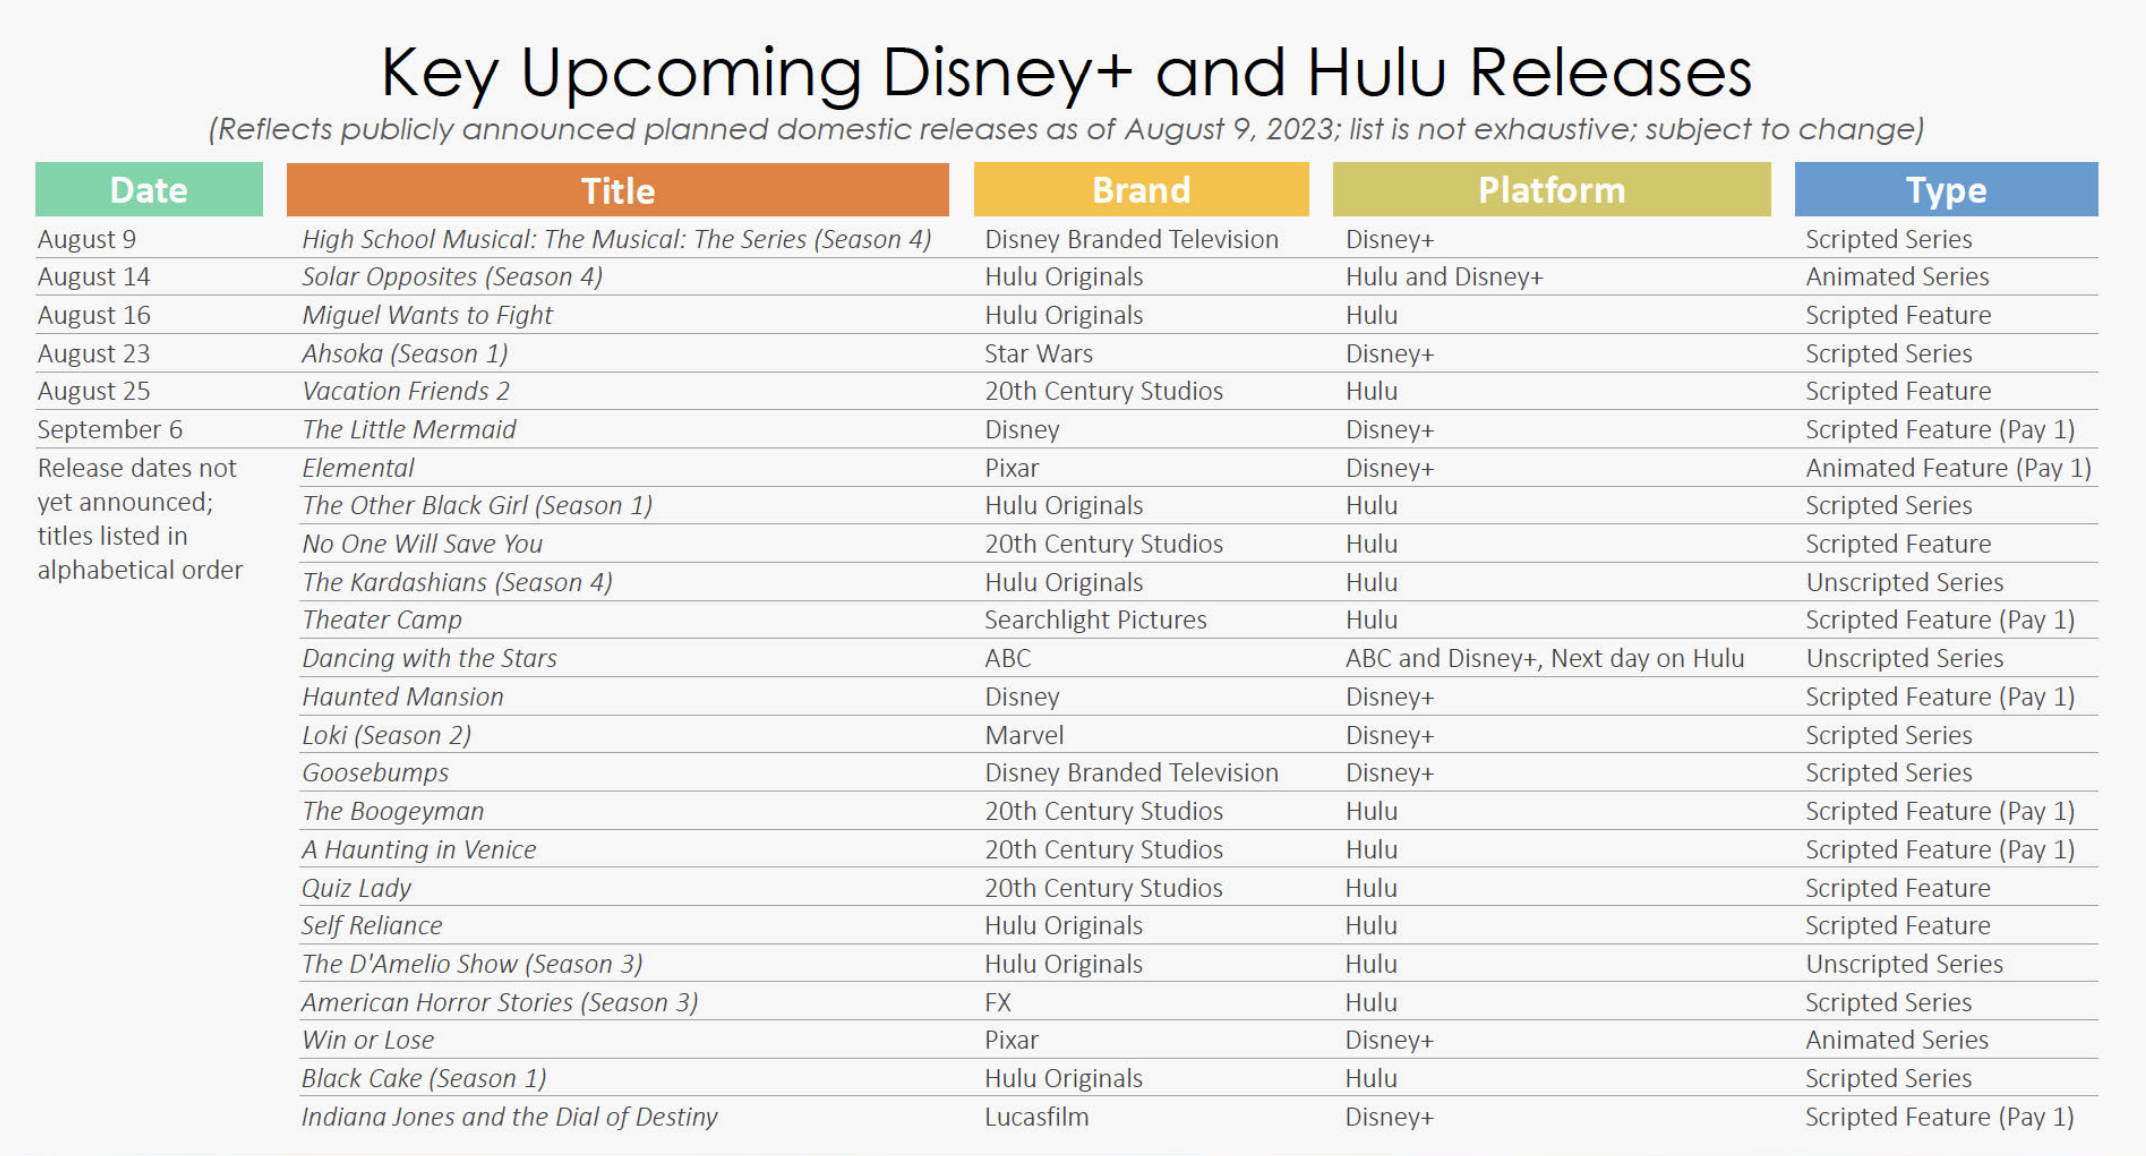 Disney+ and Hulu Release Schedule as of August 10th, 2023